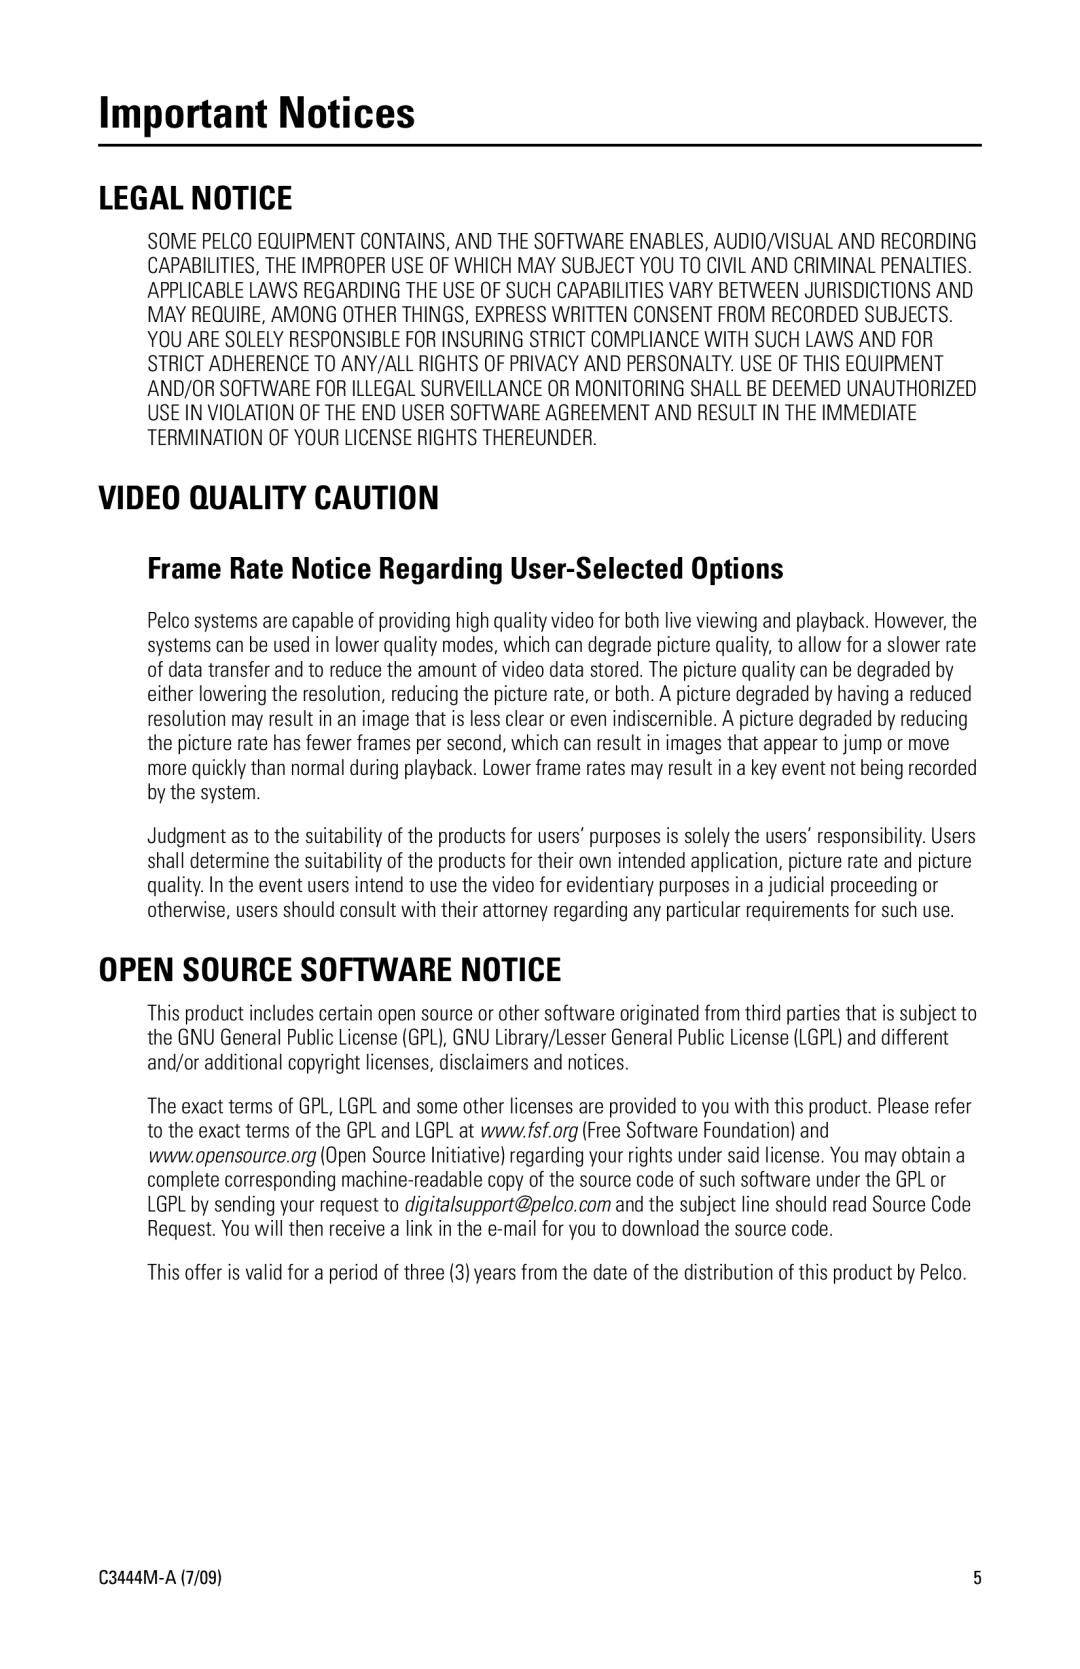 Pelco IV IP manual Important Notices, Legal Notice, Video Quality Caution, Open Source Software Notice 